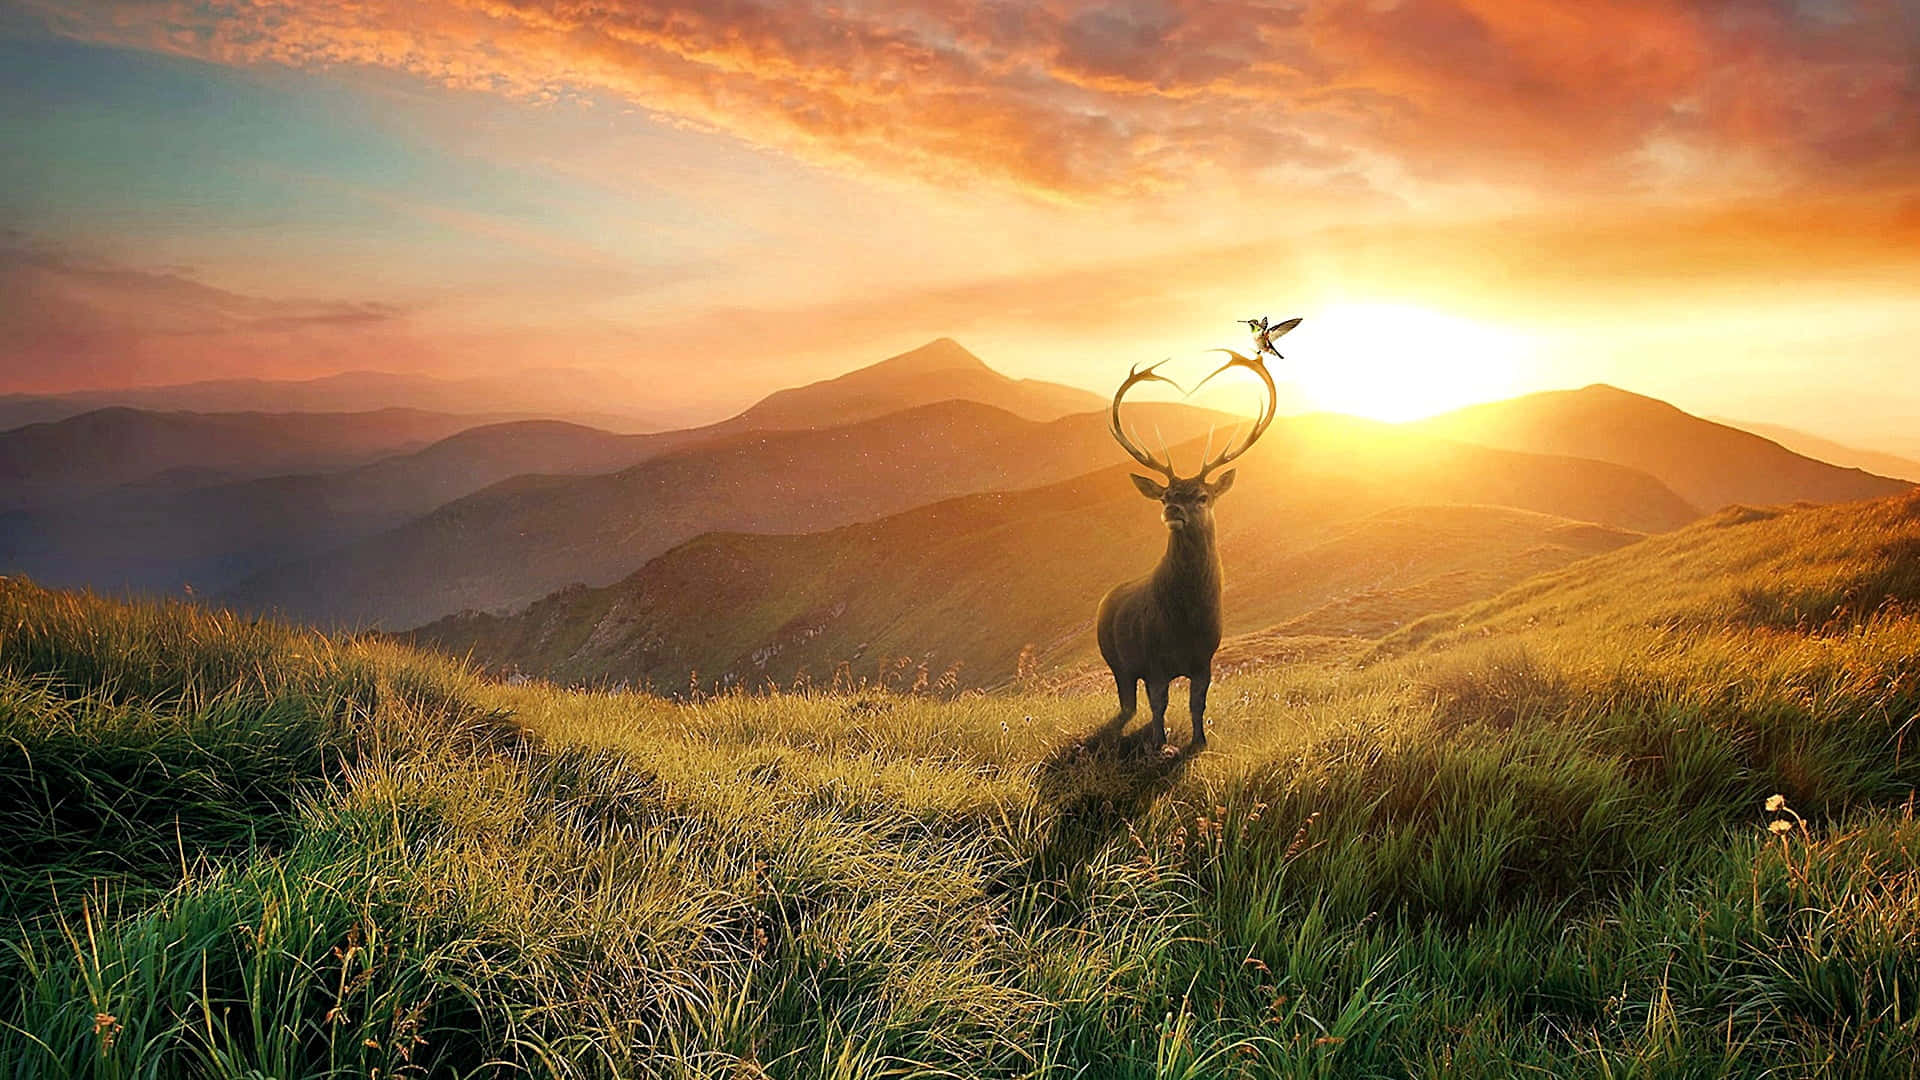 A majestic cool deer standing against its picturesque background. Wallpaper